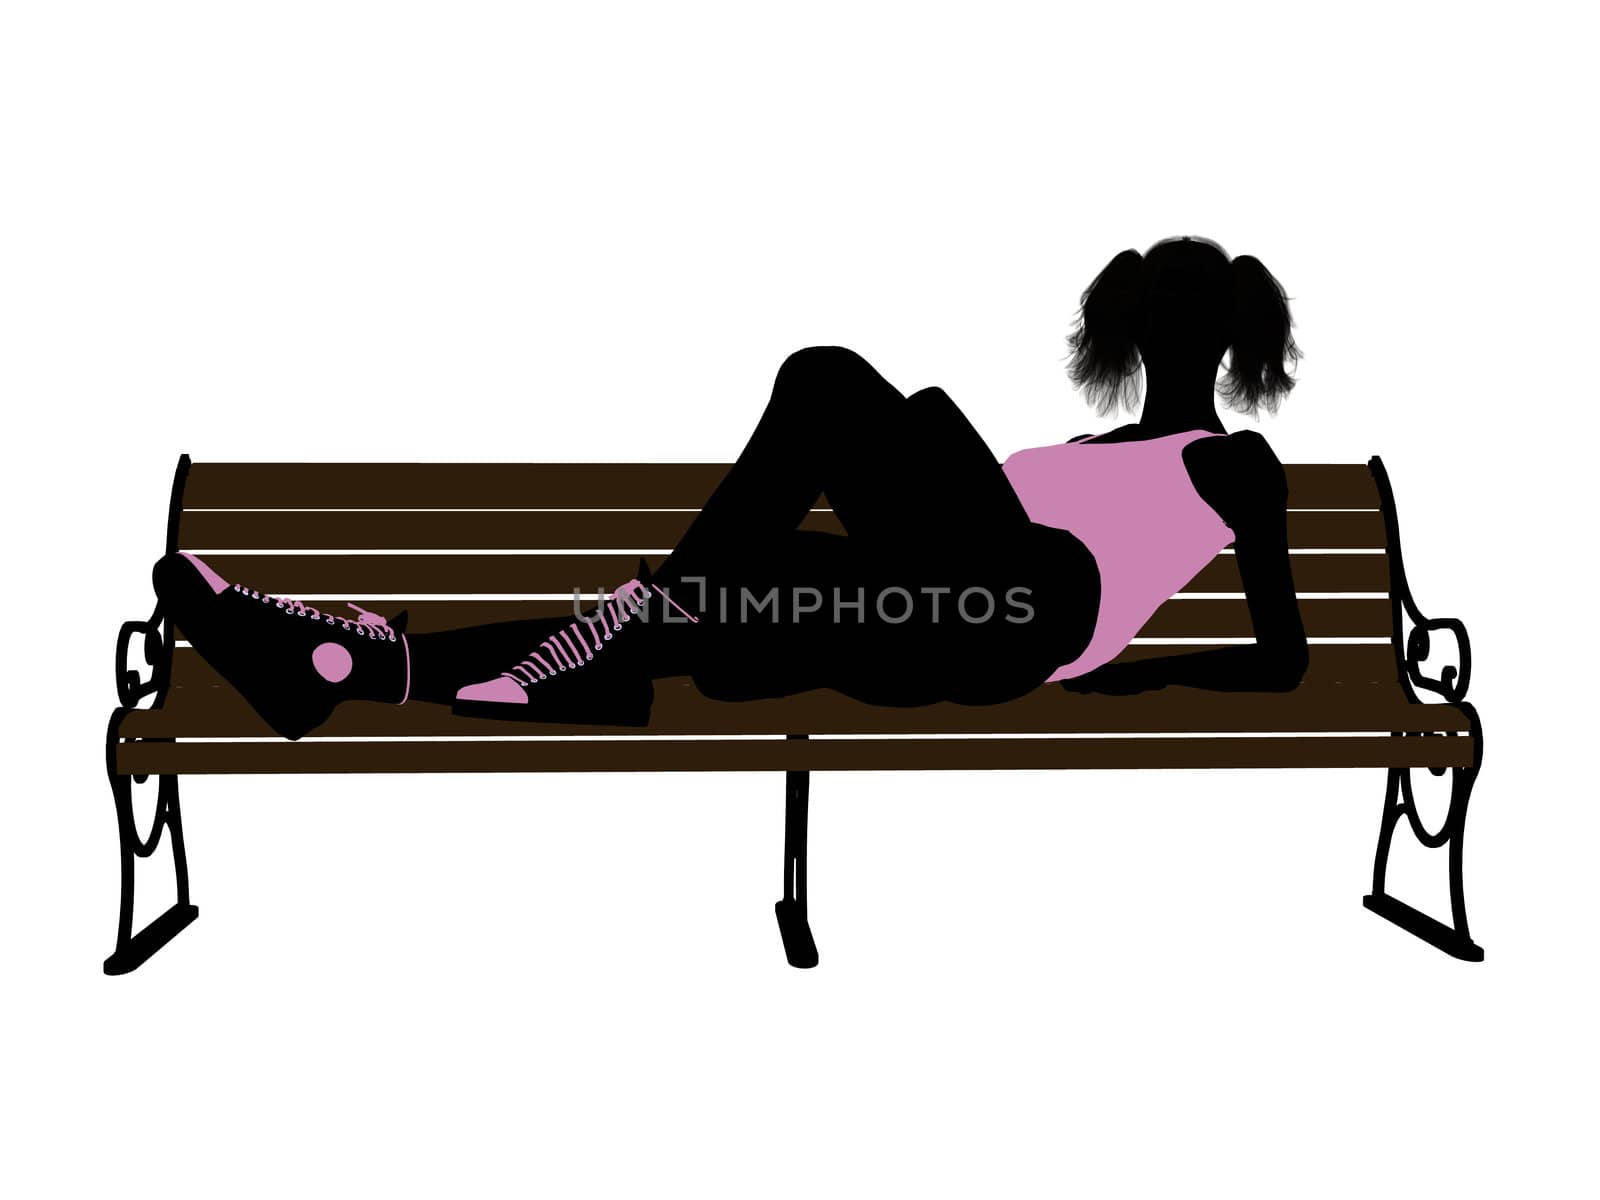 Female Athlete Lying On A Bench Illustration Silhouette by kathygold